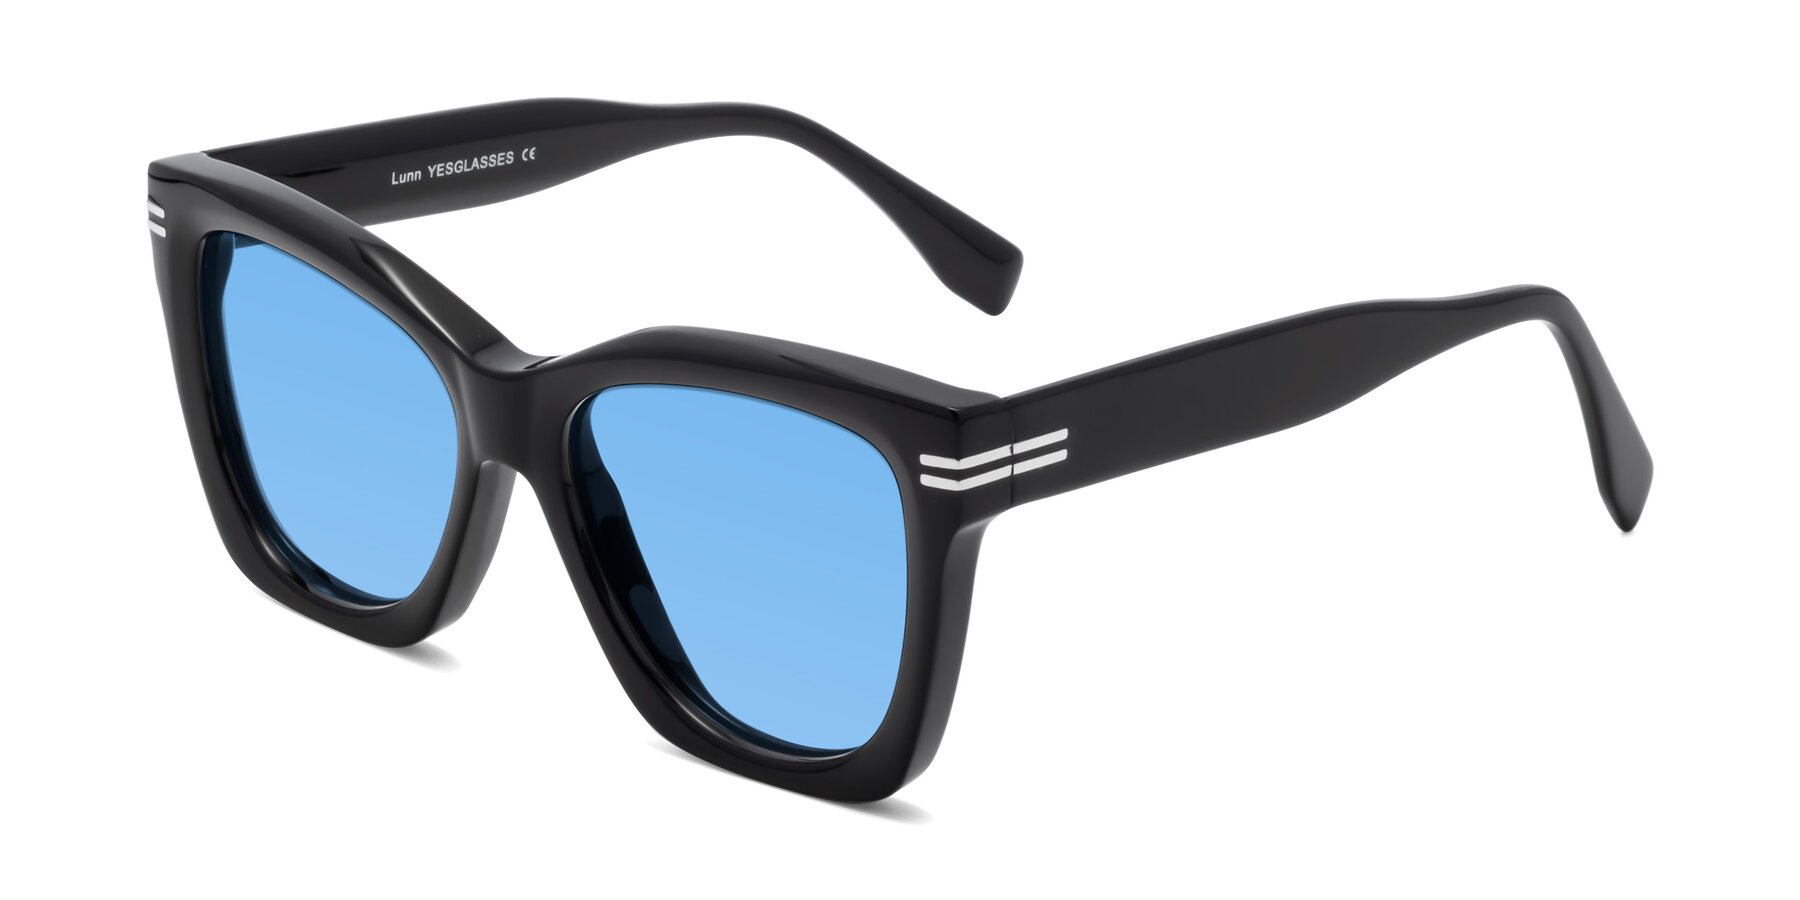 Angle of Lunn in Black with Medium Blue Tinted Lenses